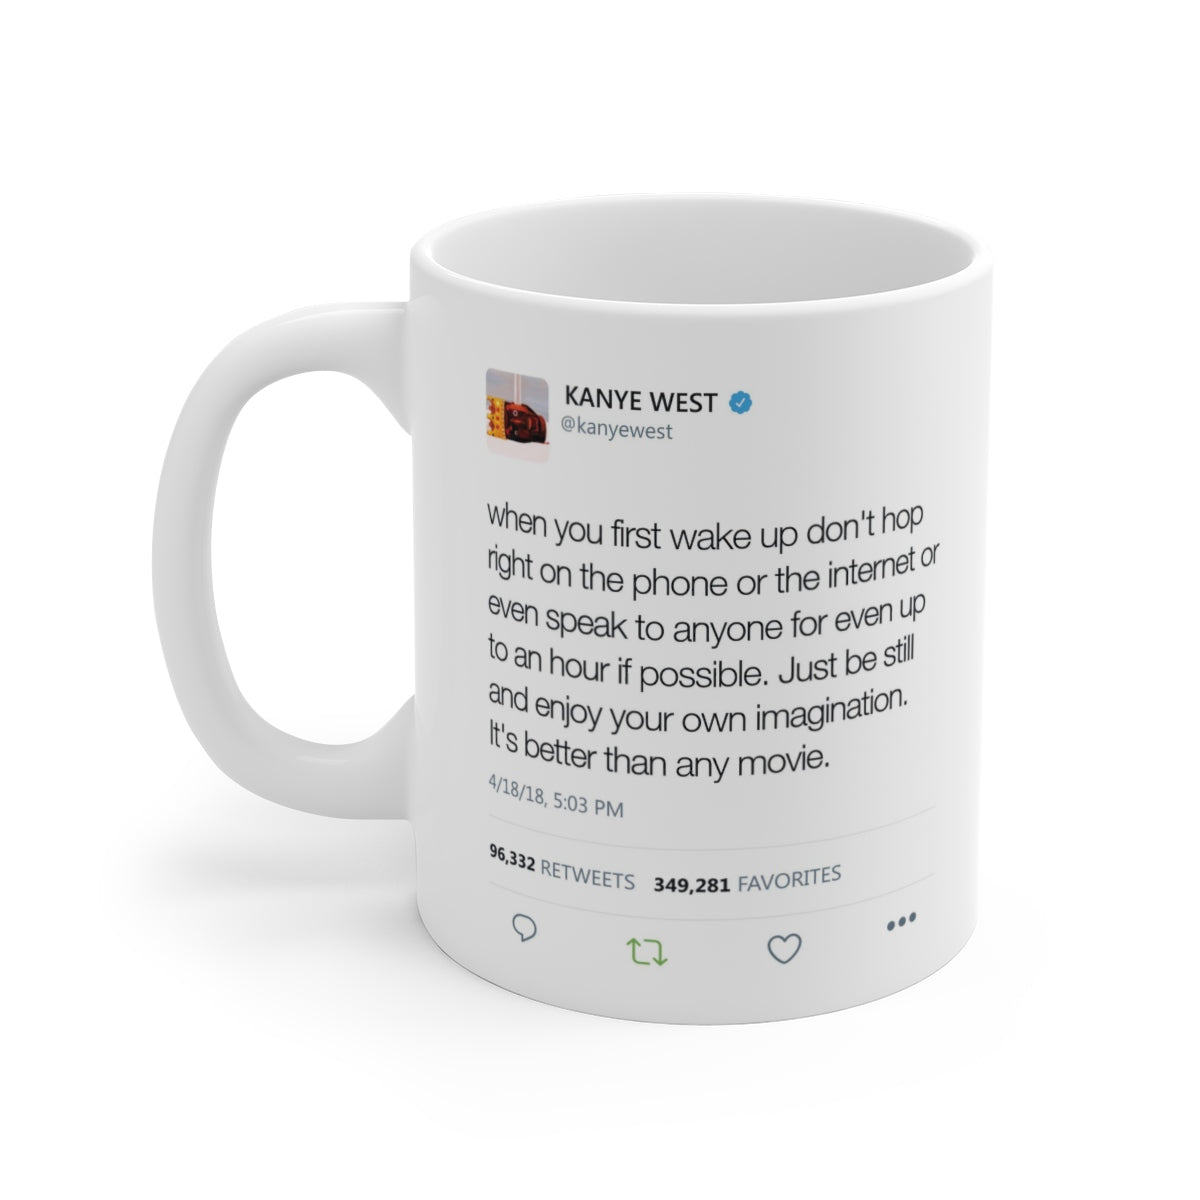 When you first wake up don't hop right on the phone - Kanye West Tweet Mug-11oz-Archethype